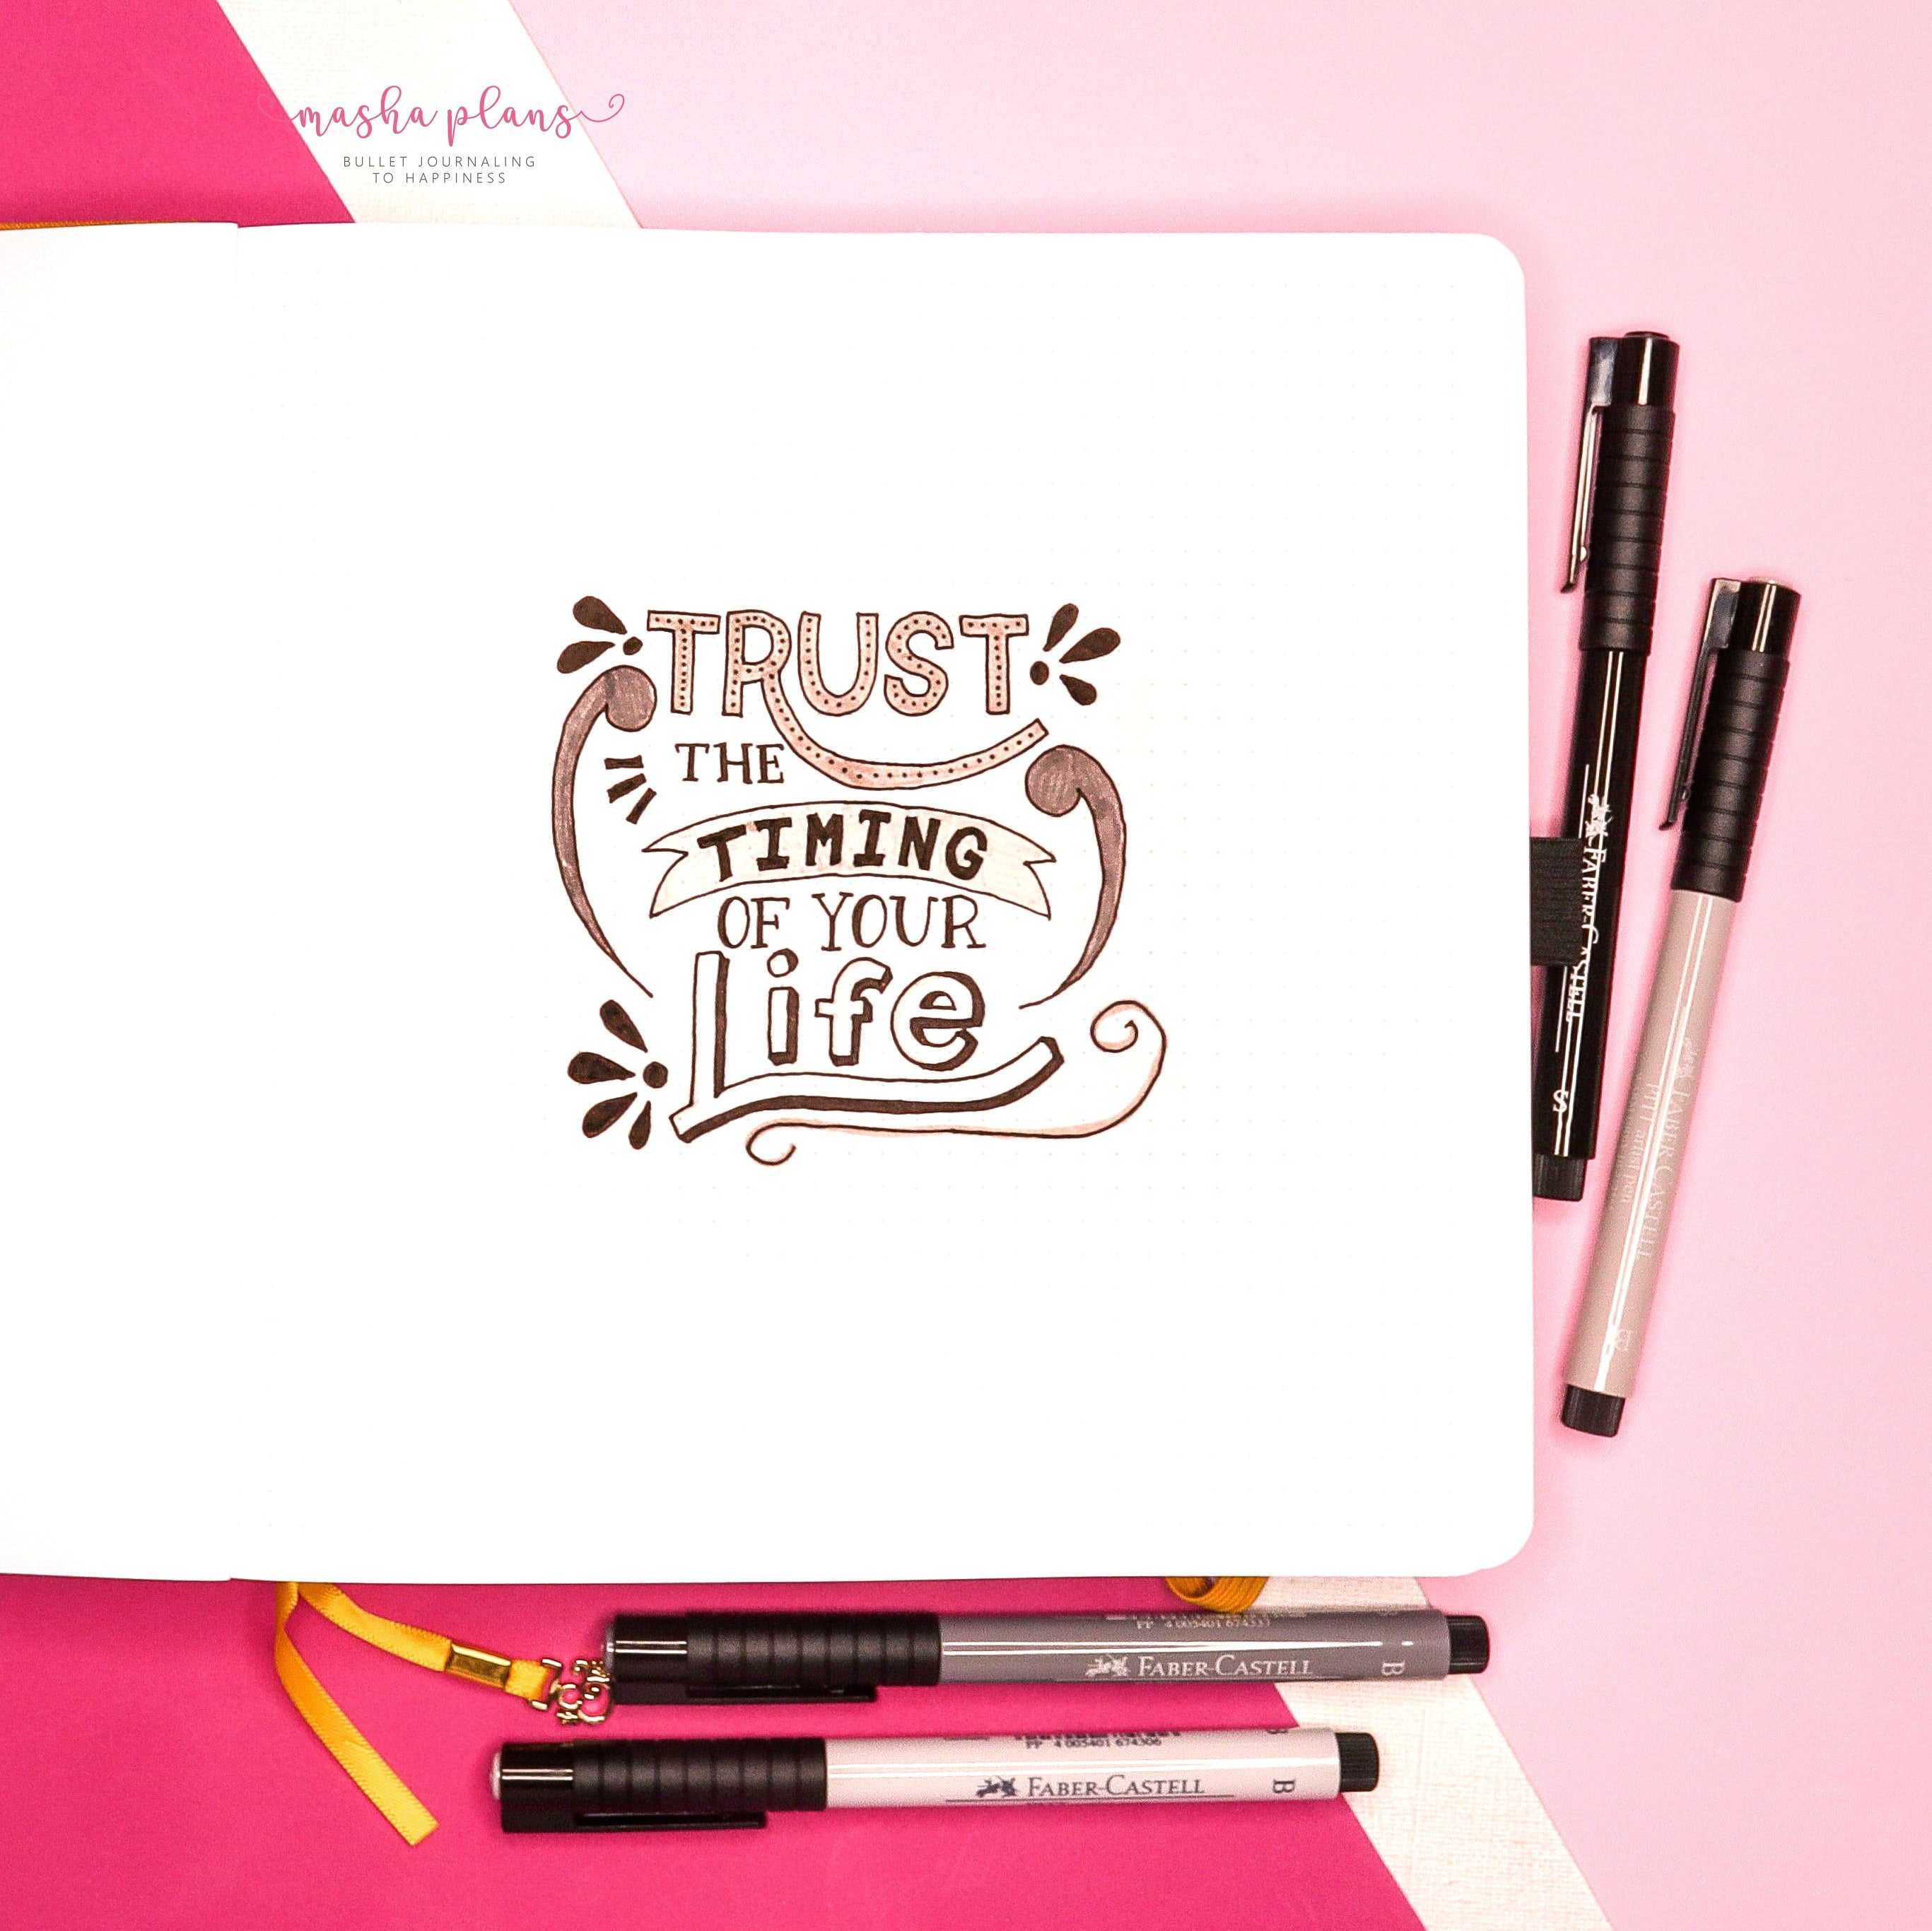 Creative Lettering Journal with Inspirational Quotes